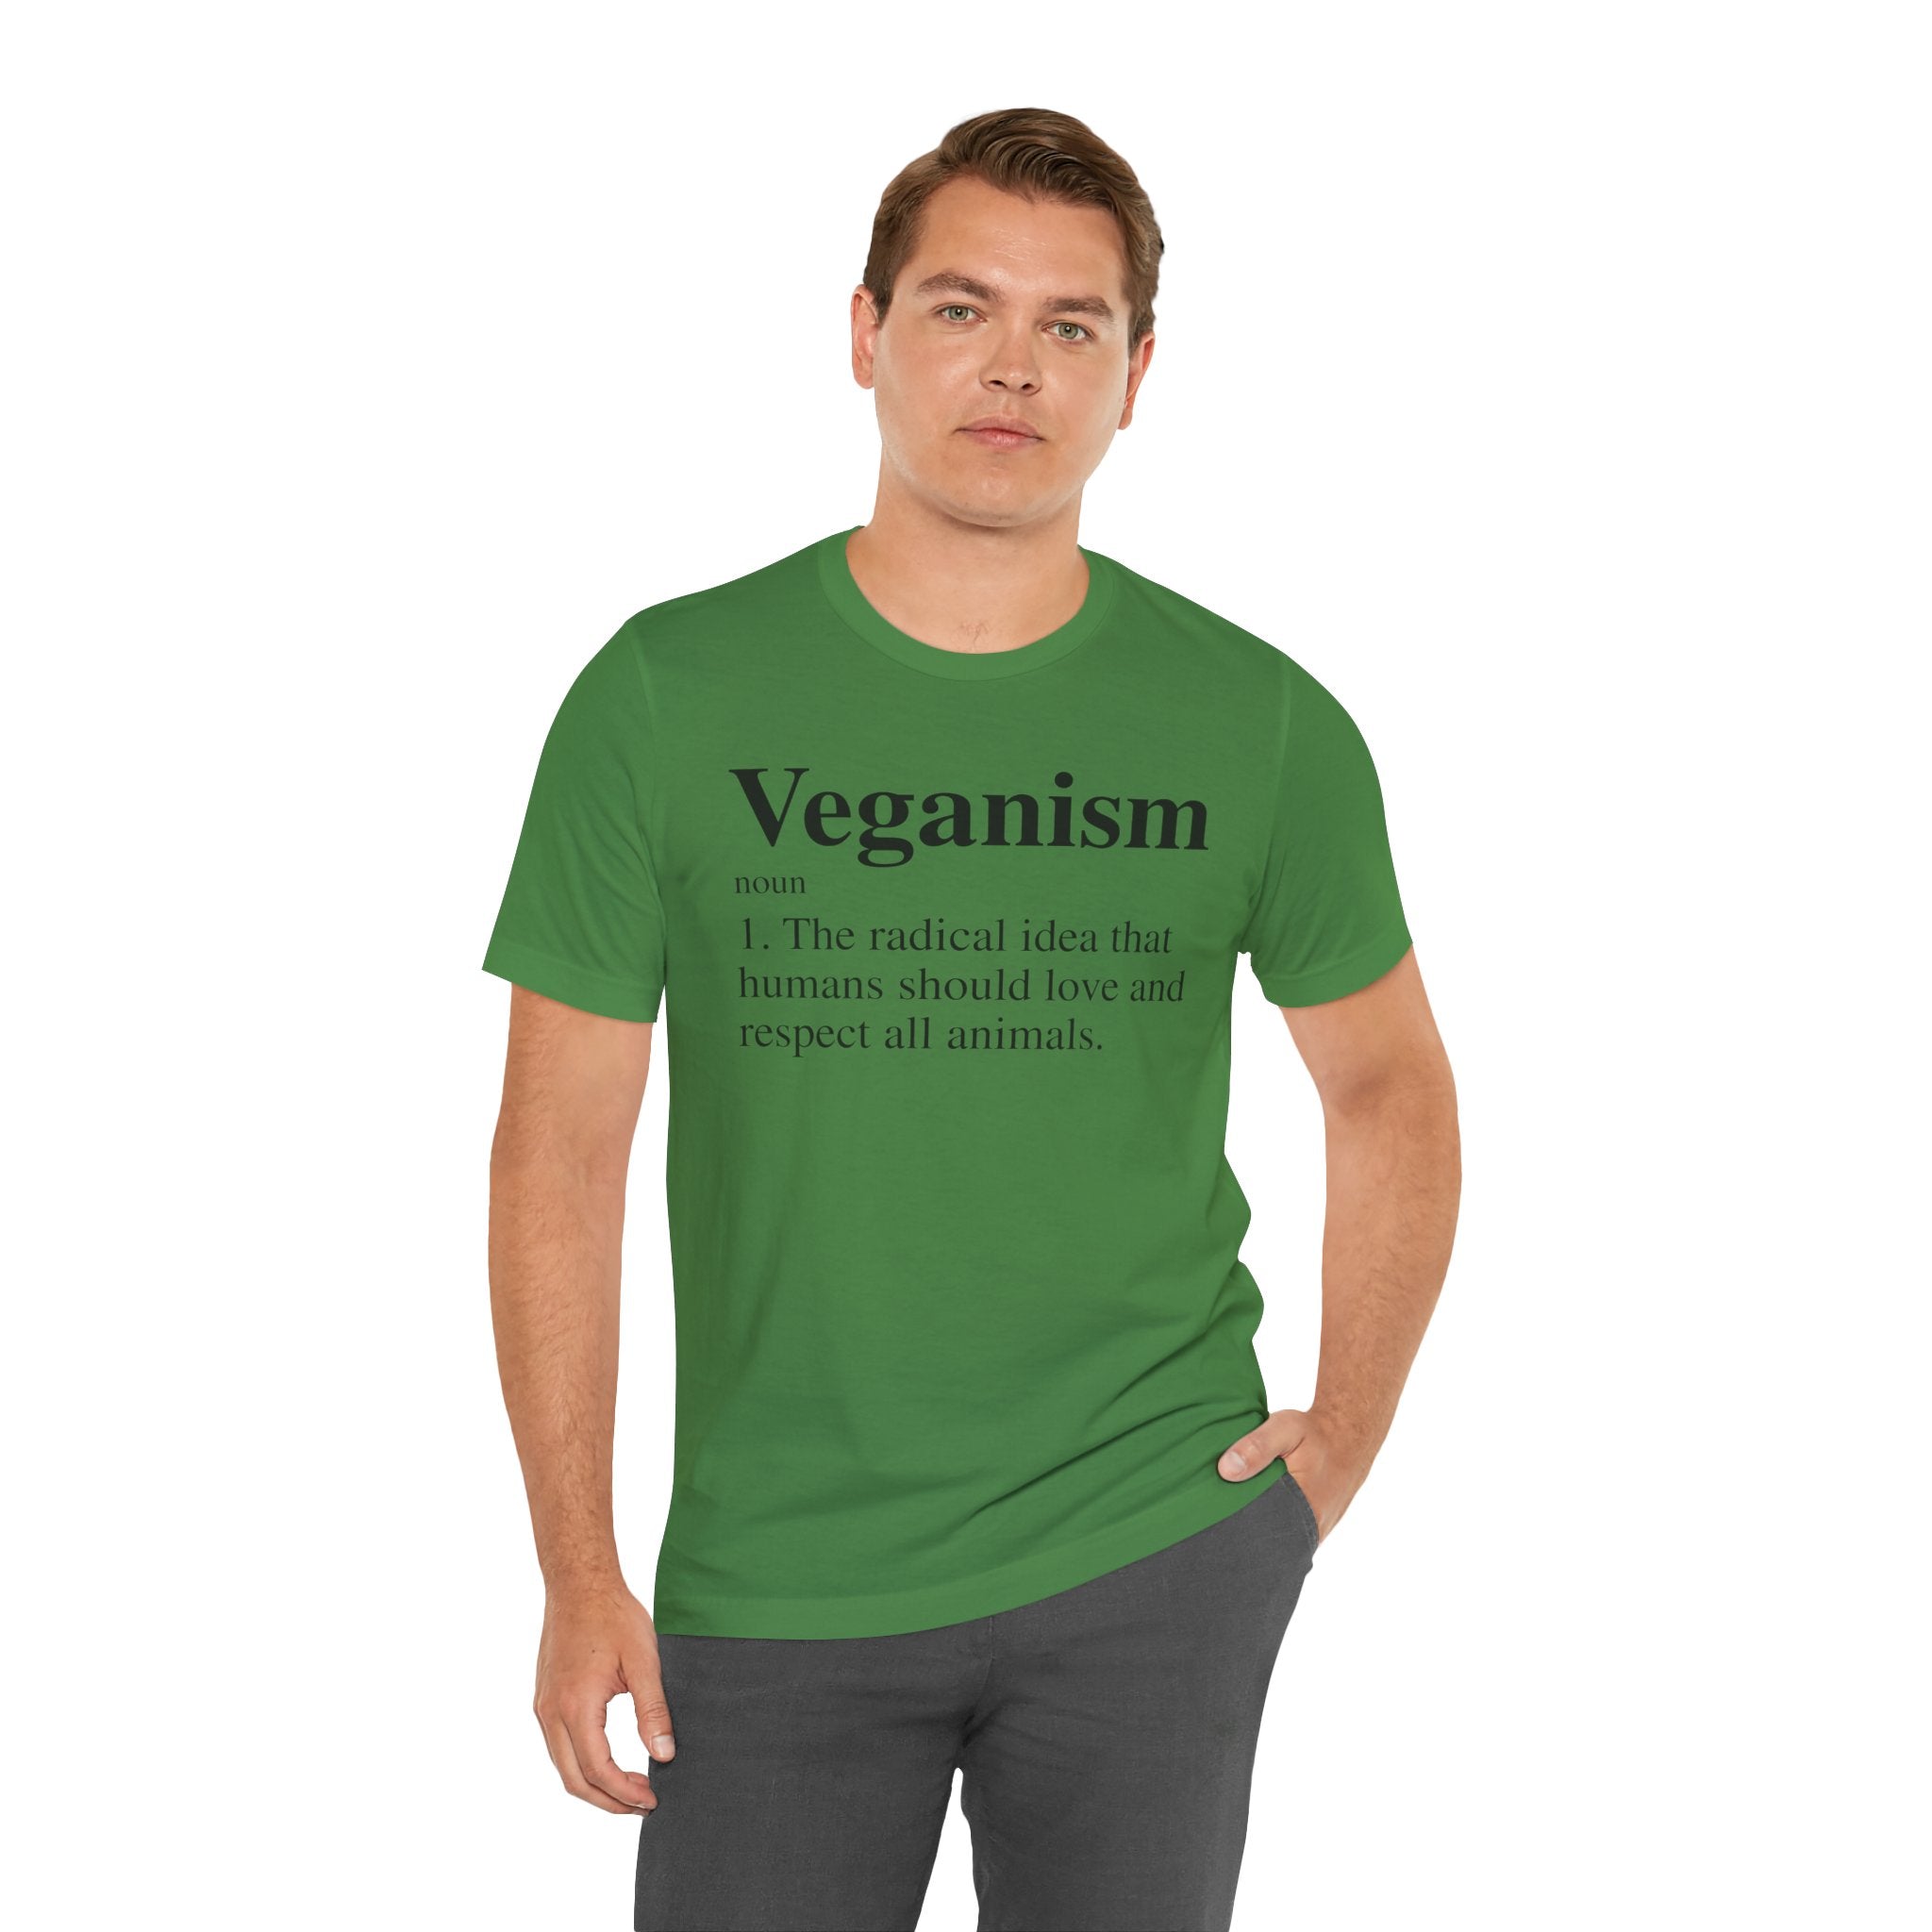 Man in a green Veganism T-shirt with the word "veganism" and its definition printed on it, standing with one hand on his hip.